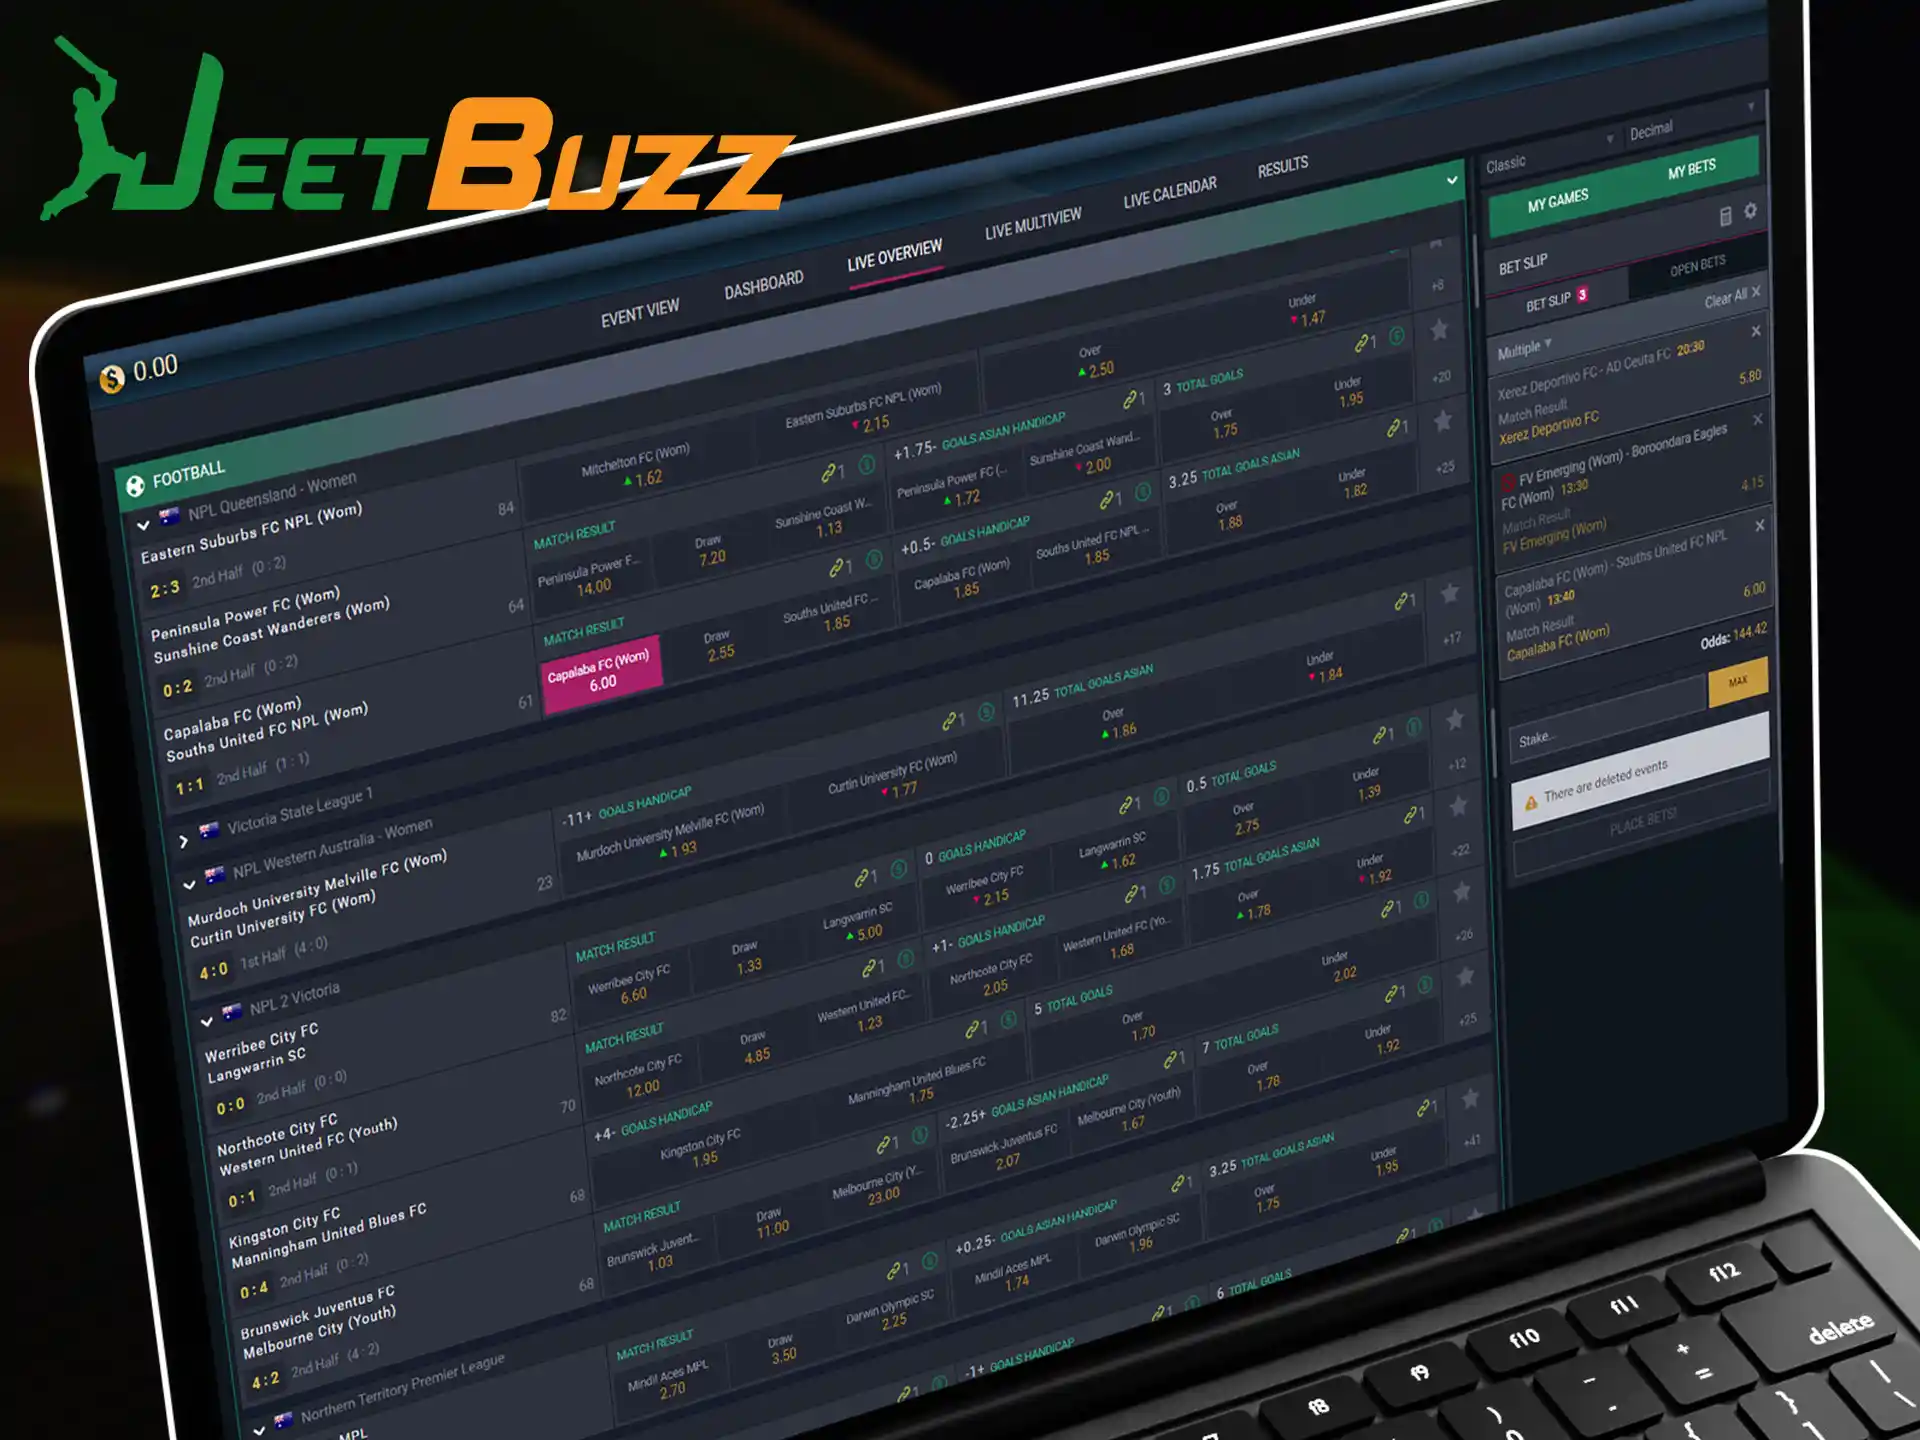 Place real-time bets and follow the match at JeetBuzz.